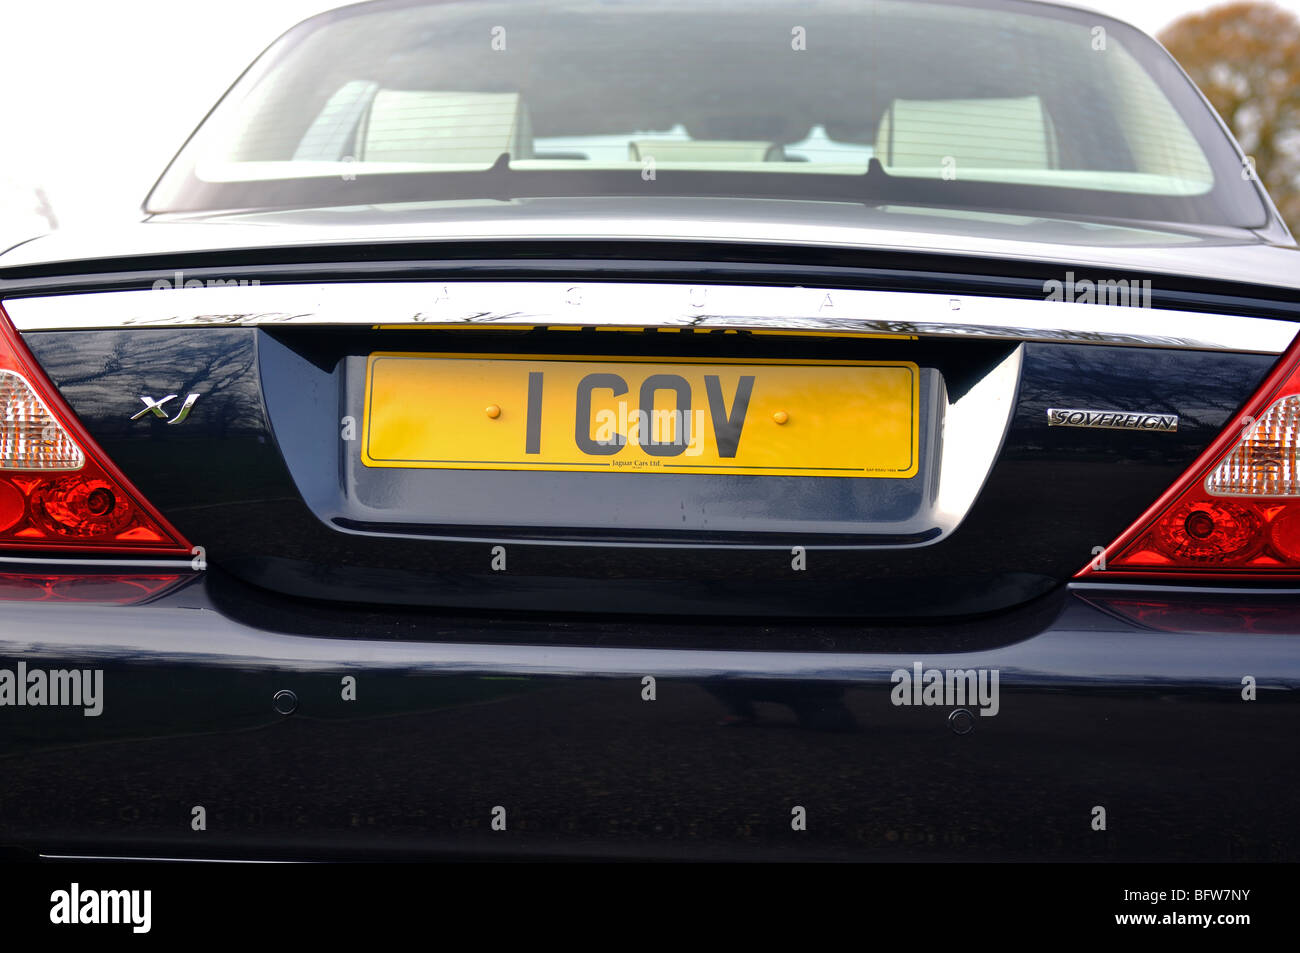 Jaguar XJ Sovereign, Lord Mayor of Coventry`s official car Stock Photo